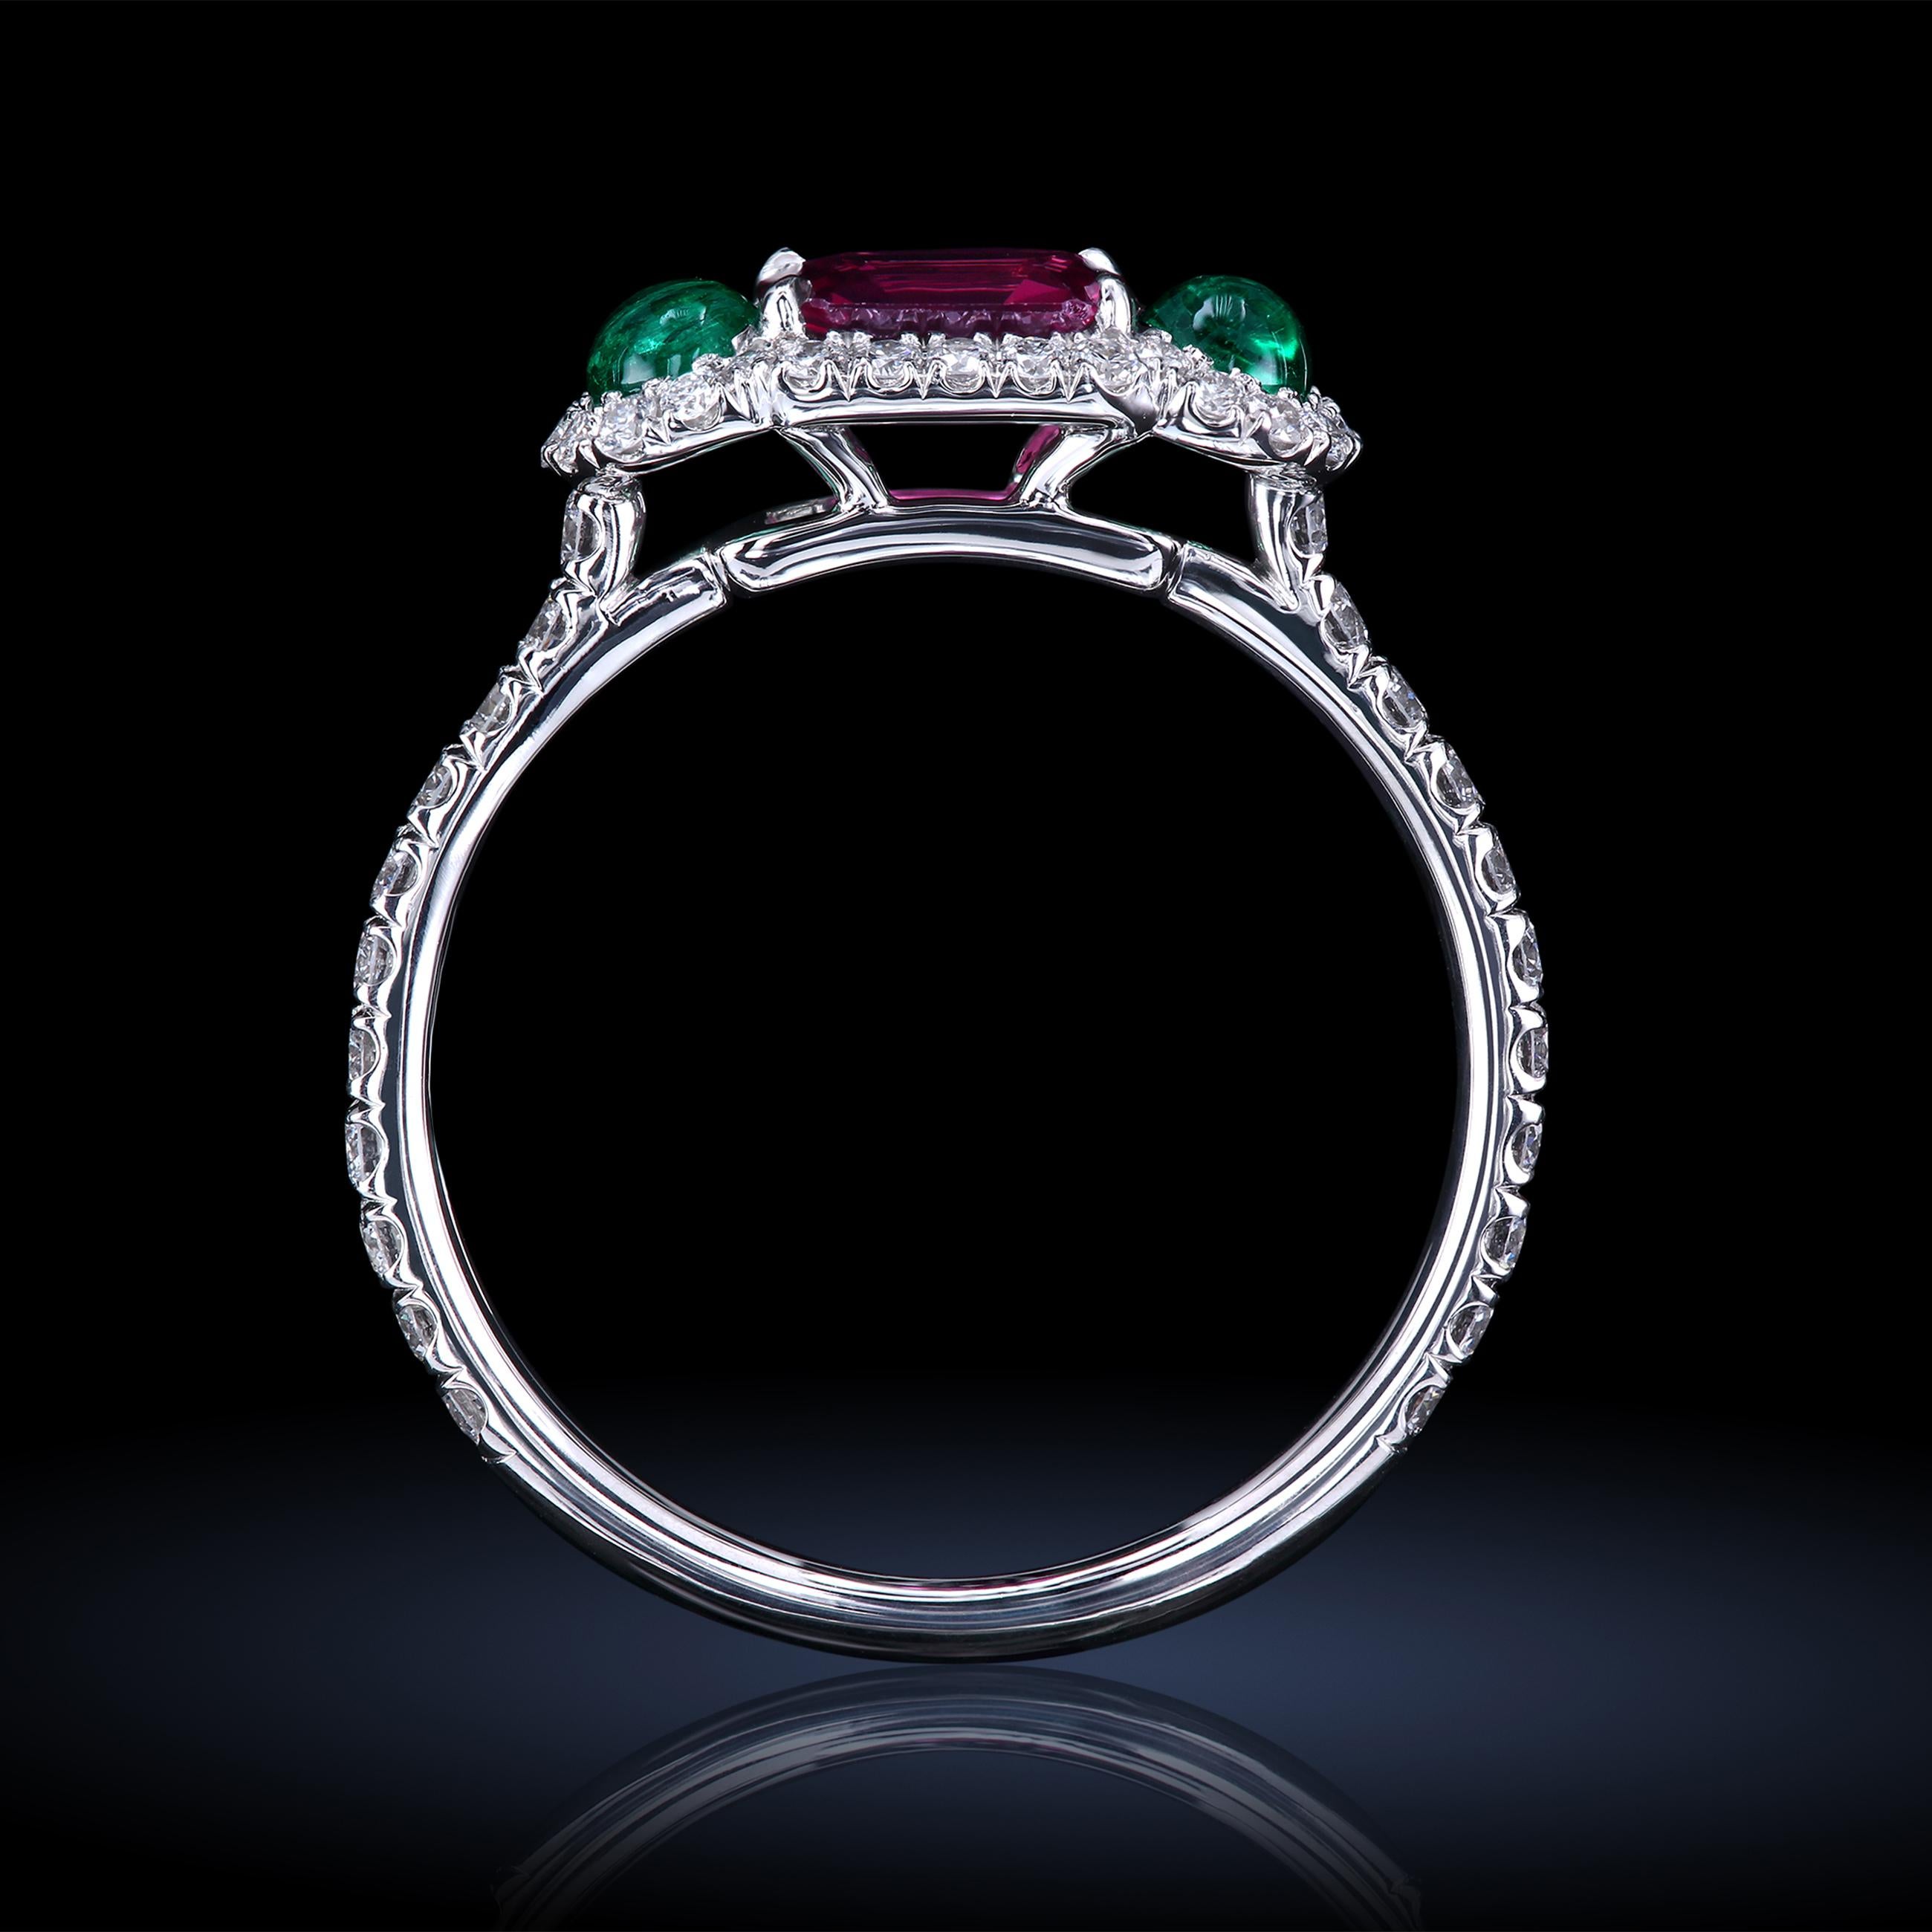 Women's Leon Mege Ruby and Cab Emeralds in Micro Pave Platinum Bespoke Right-Hand Ring